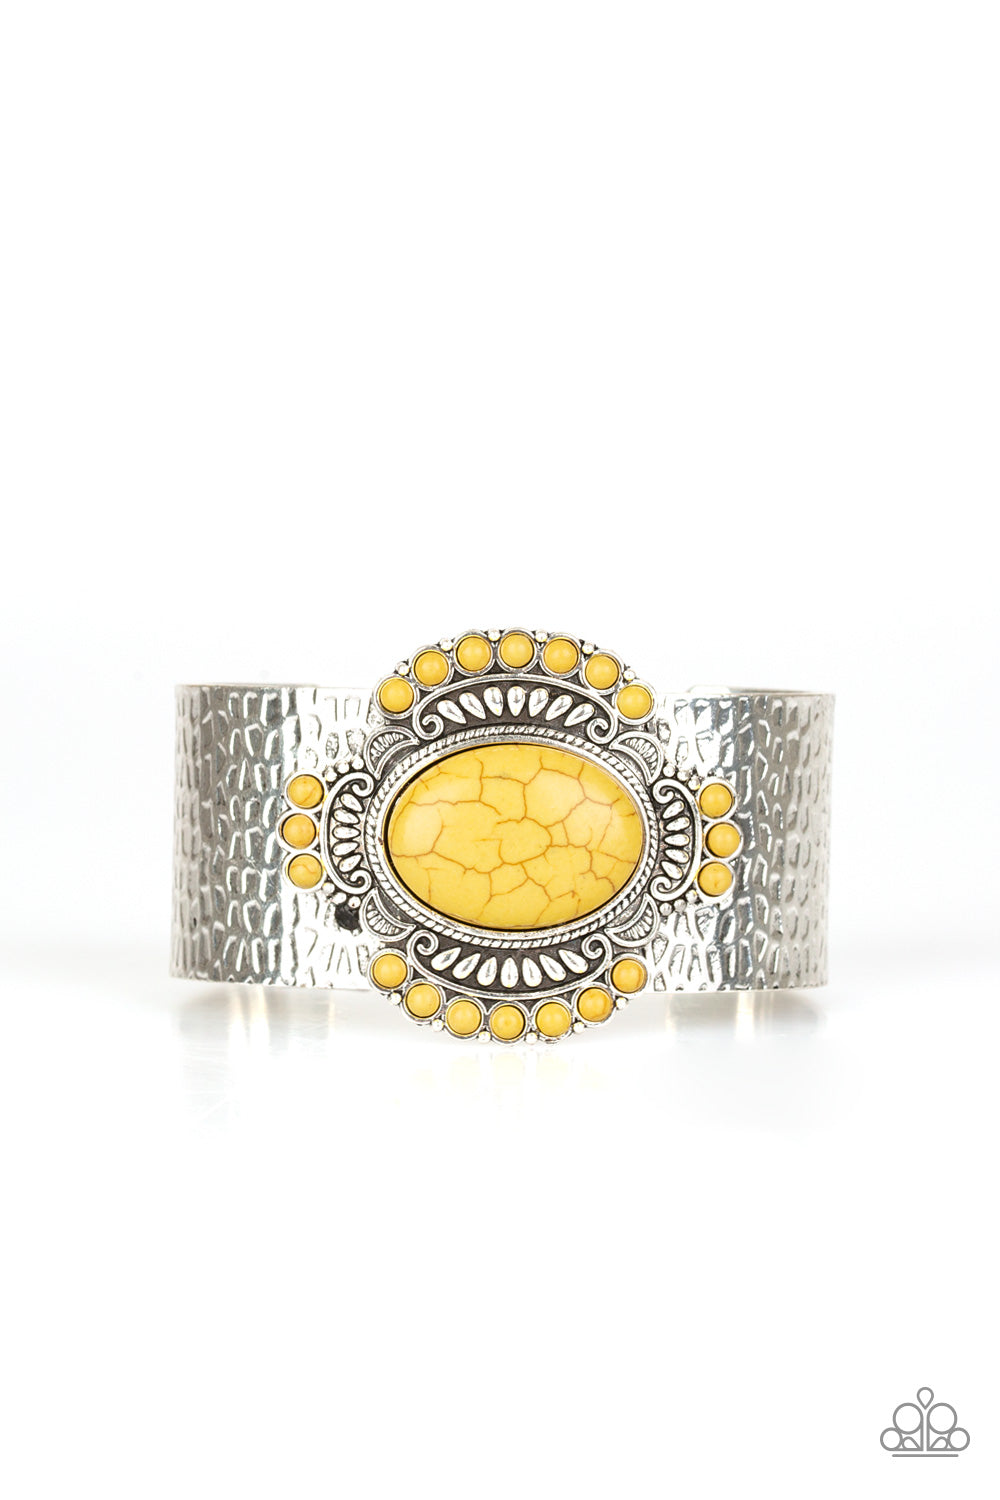 Paparazzi Canyon Crafted - Yellow Stones - Silver Cuff Bracelet - $5 Jewelry With Ashley Swint